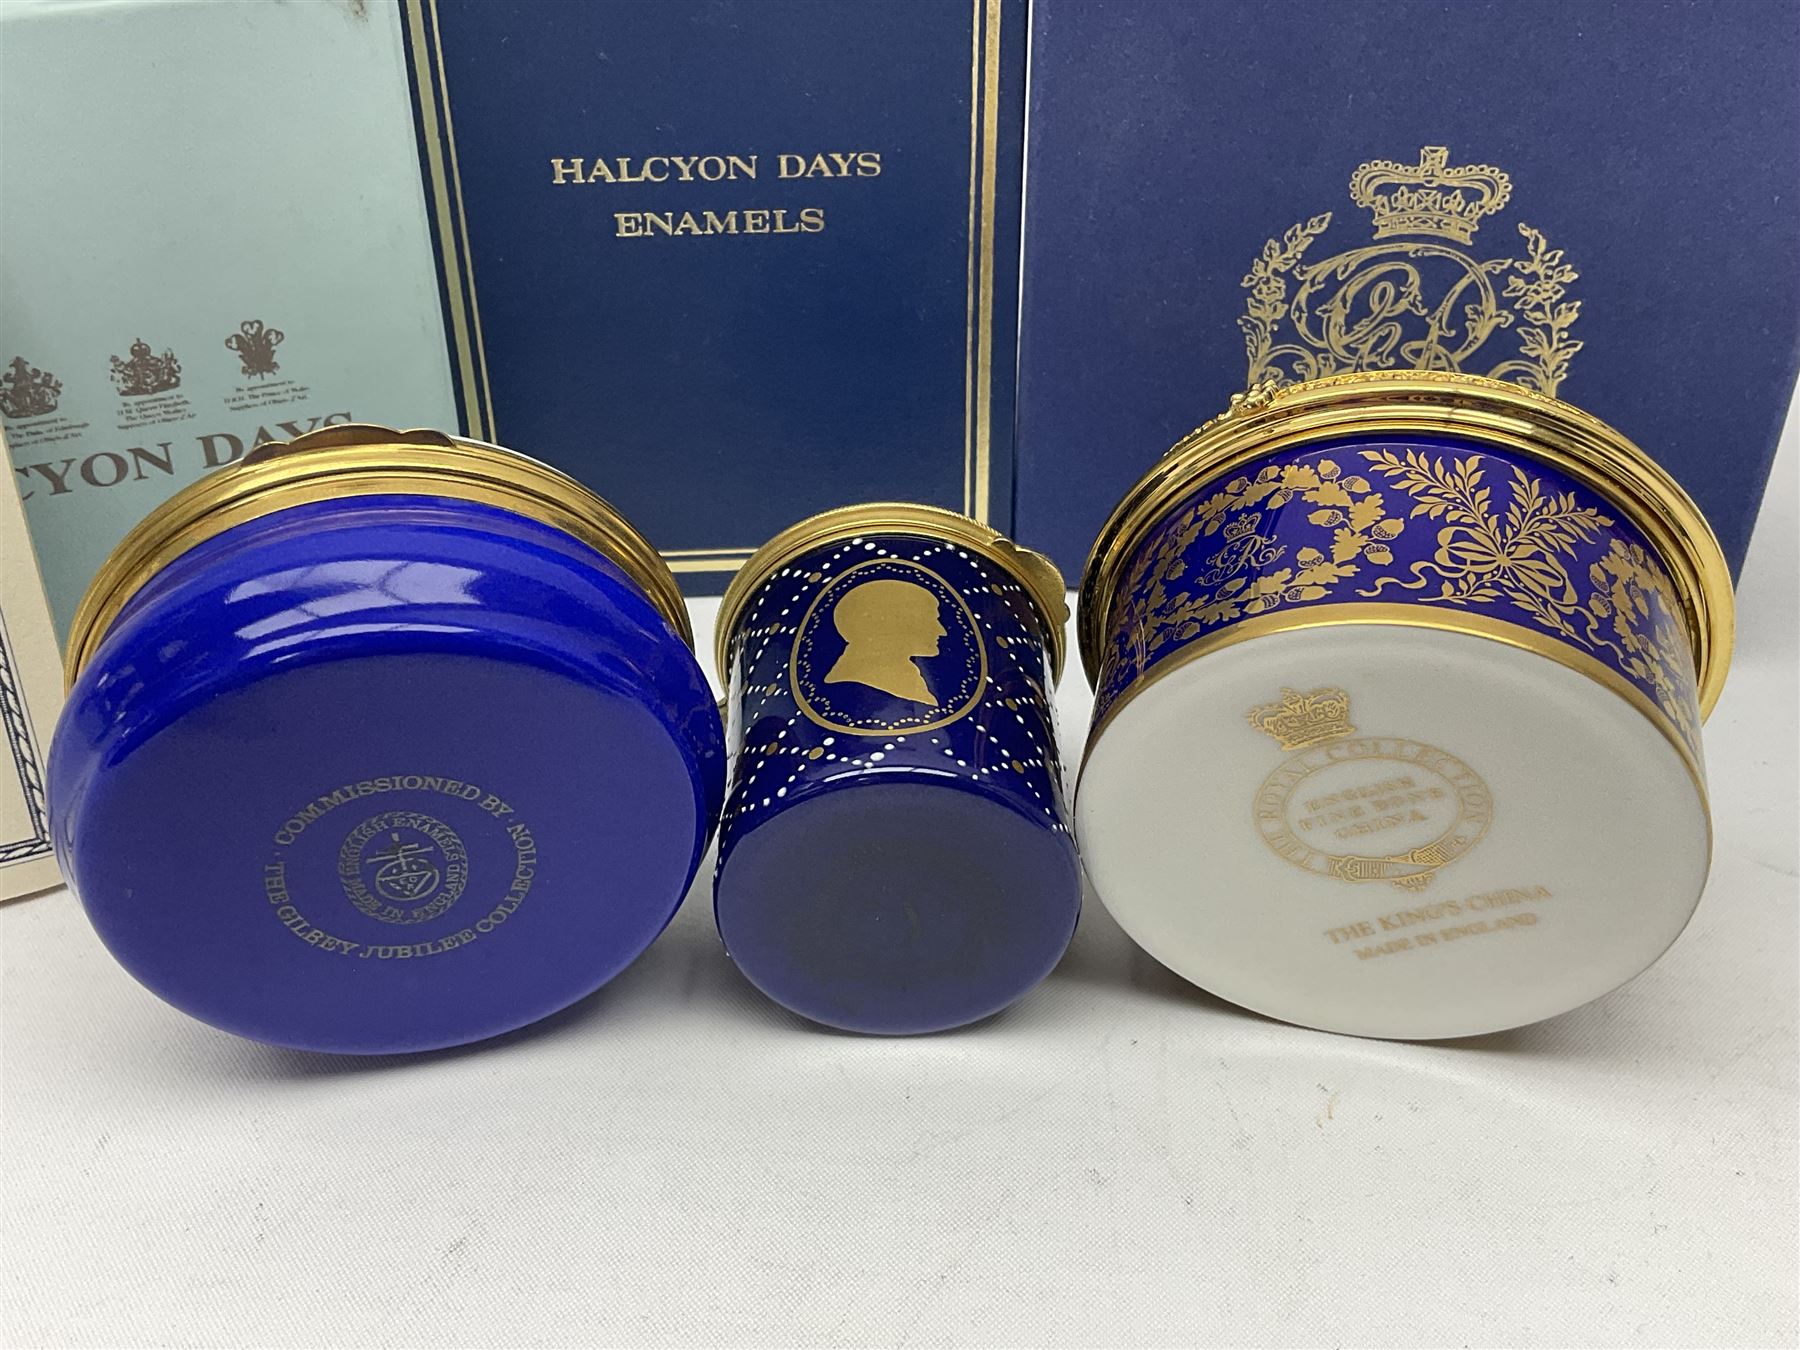 Five Halcyon Days Royal commemorative enamel boxes and one other similar enamel box - Image 13 of 15